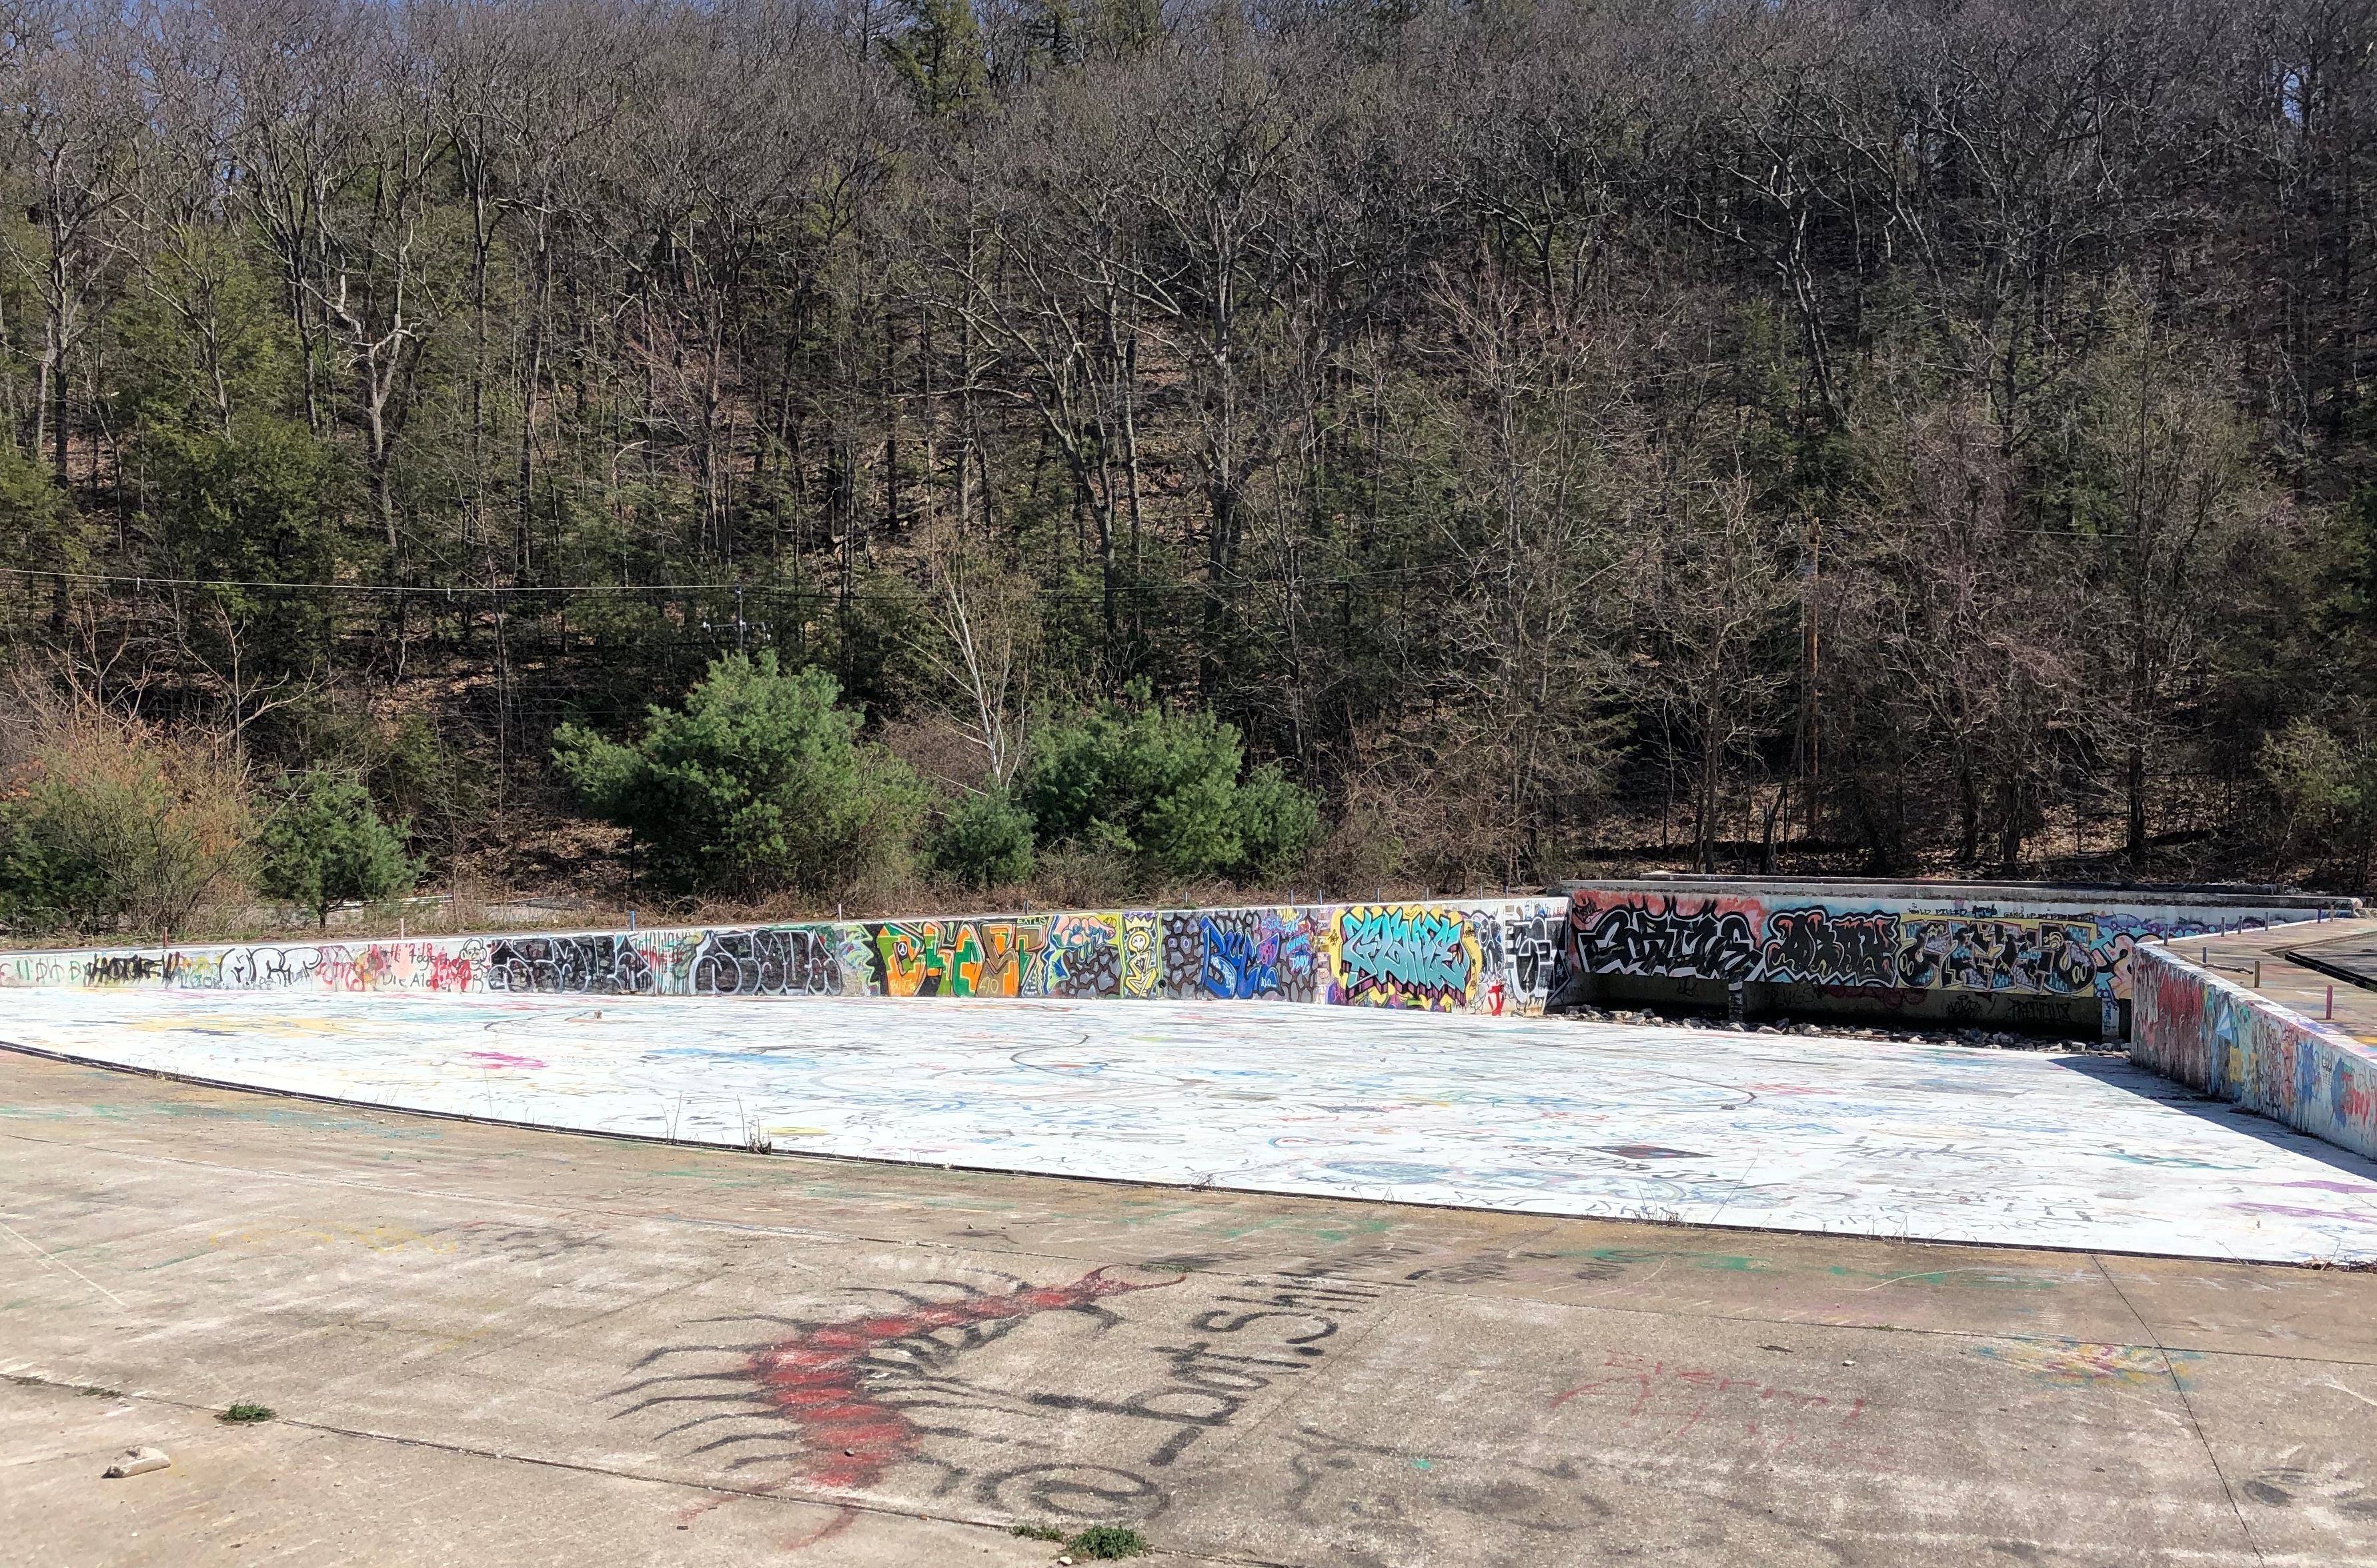 Another view of the vacant wave pool at the former Mt. Tom Ski Area.